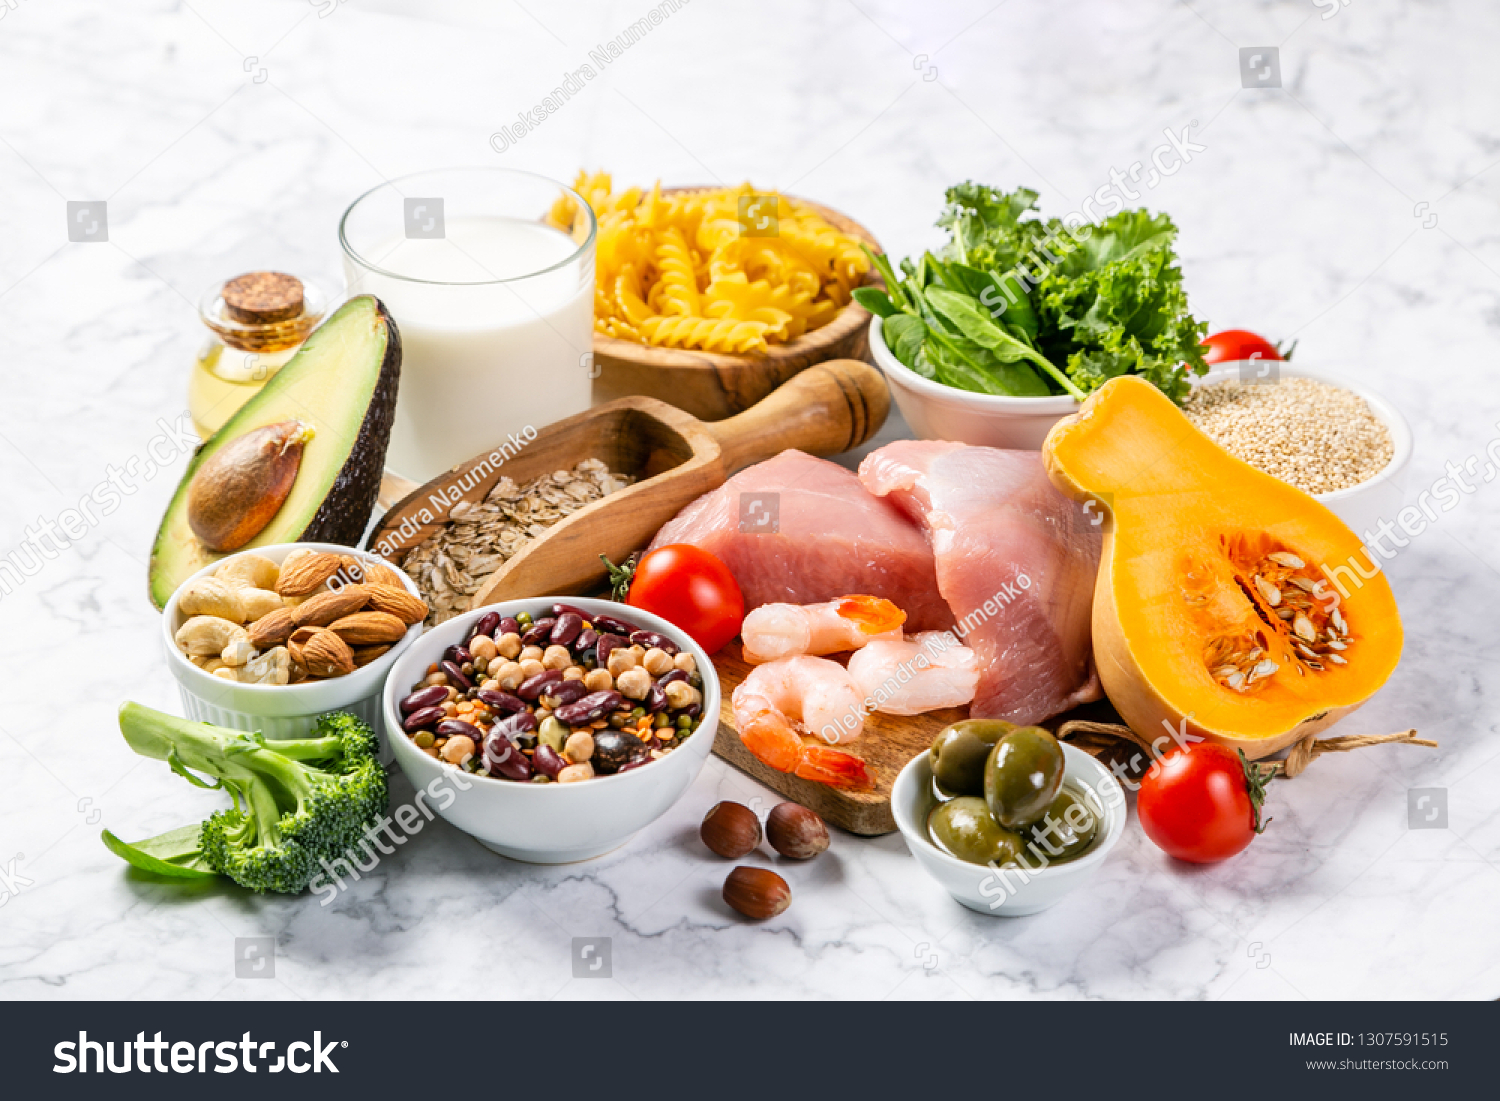 Mediterranean diet concept - meat, fish, fruits and vegetables on bright green background #1307591515